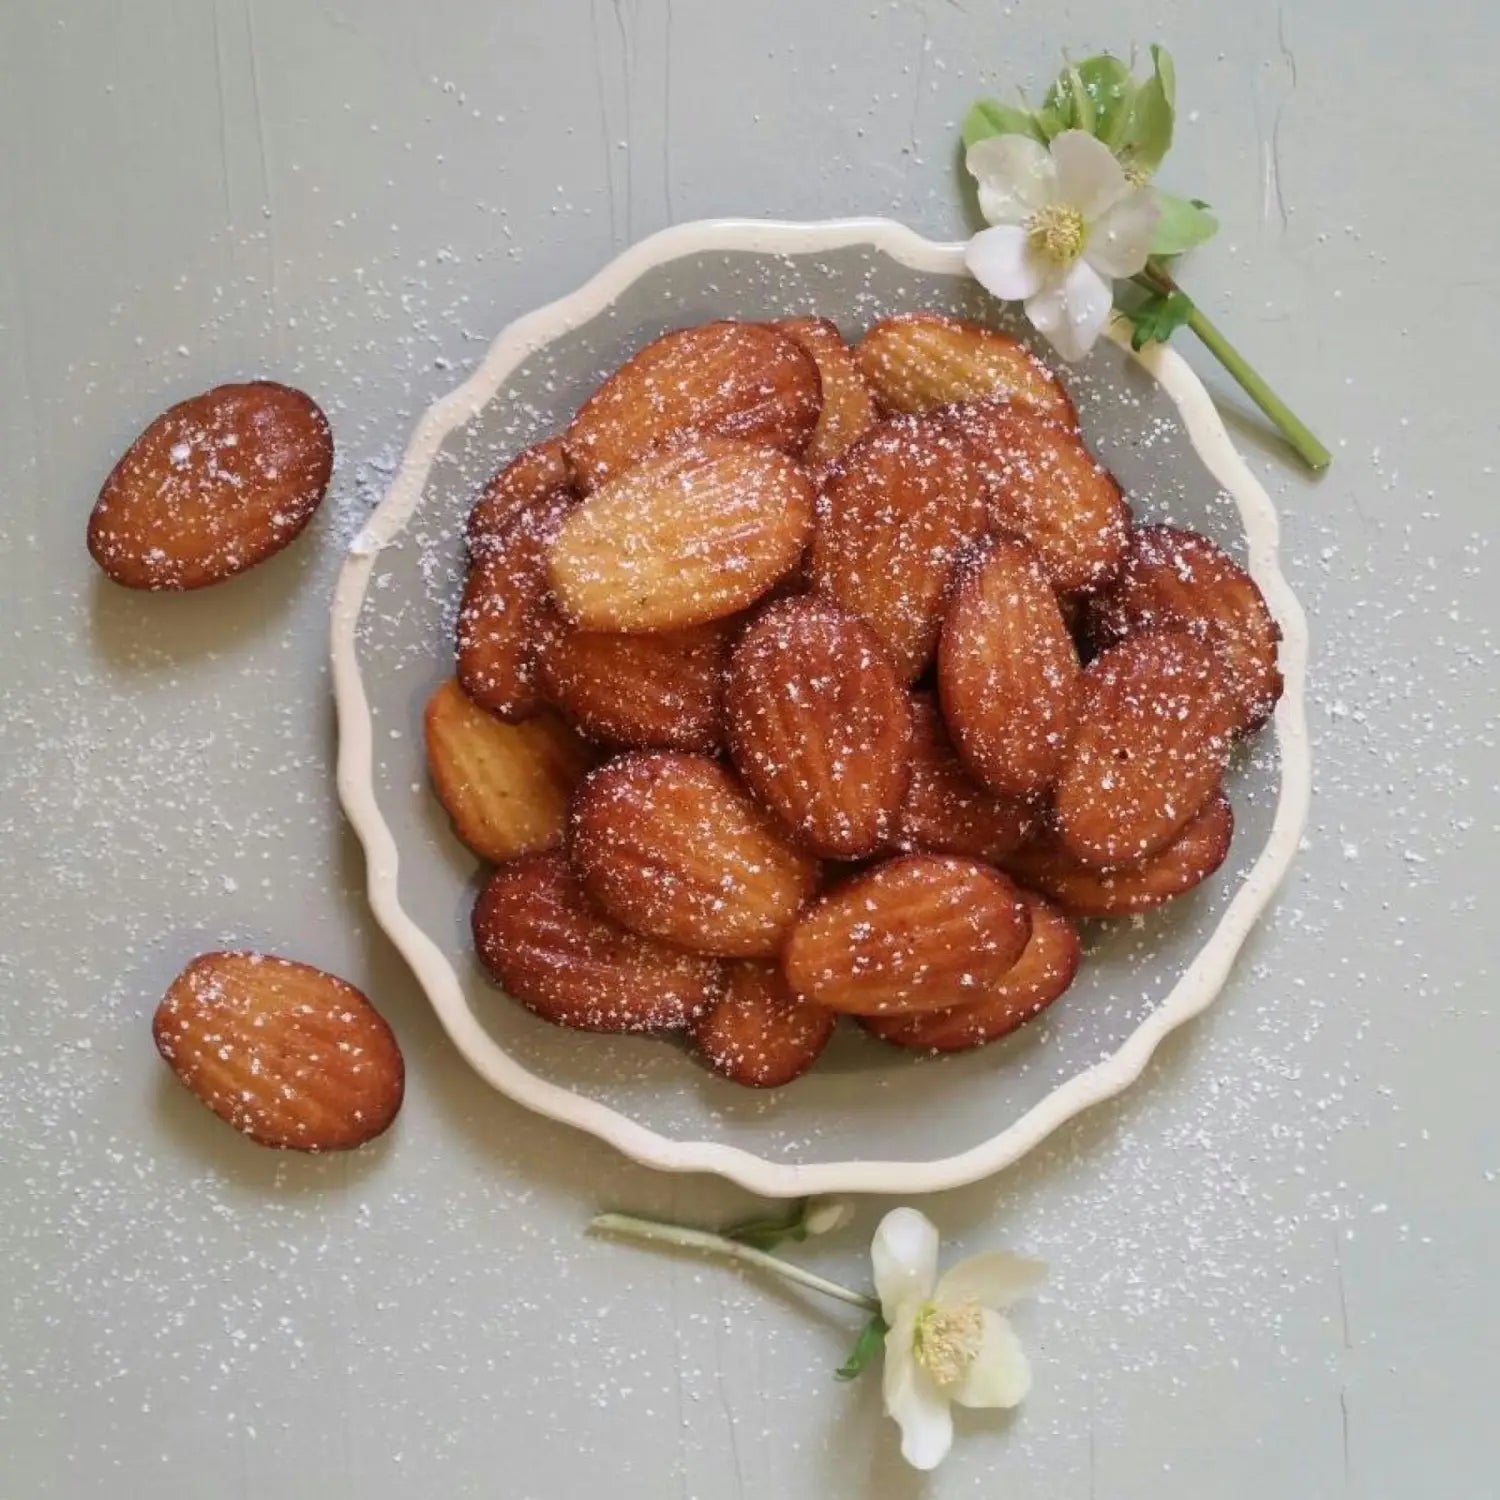 Quick and delicious lavender honey madeleines